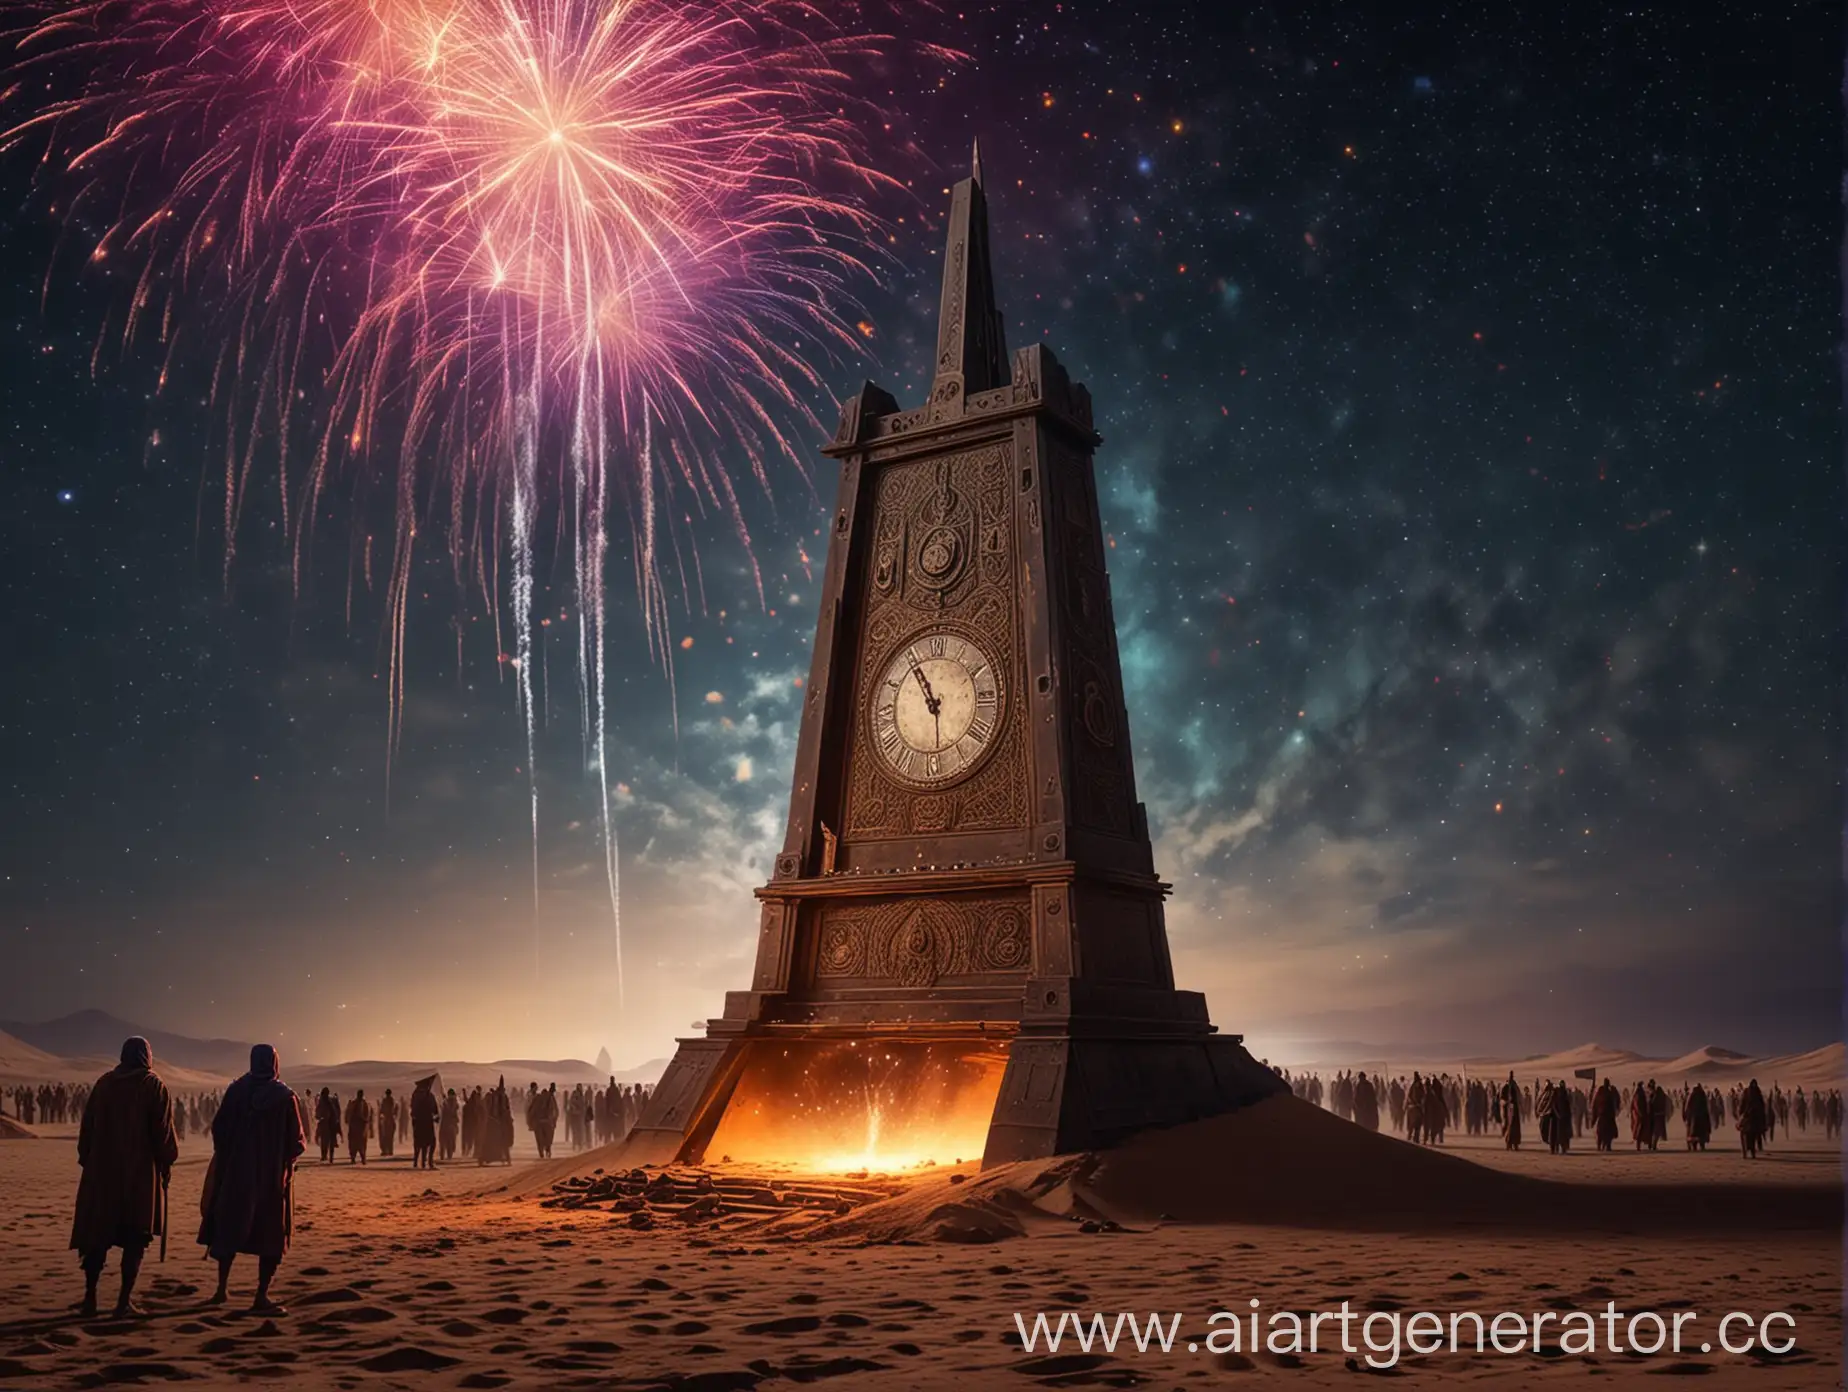 Ancient-Celebration-at-Desert-Guillotine-with-Clocks-and-Dissolving-Figure